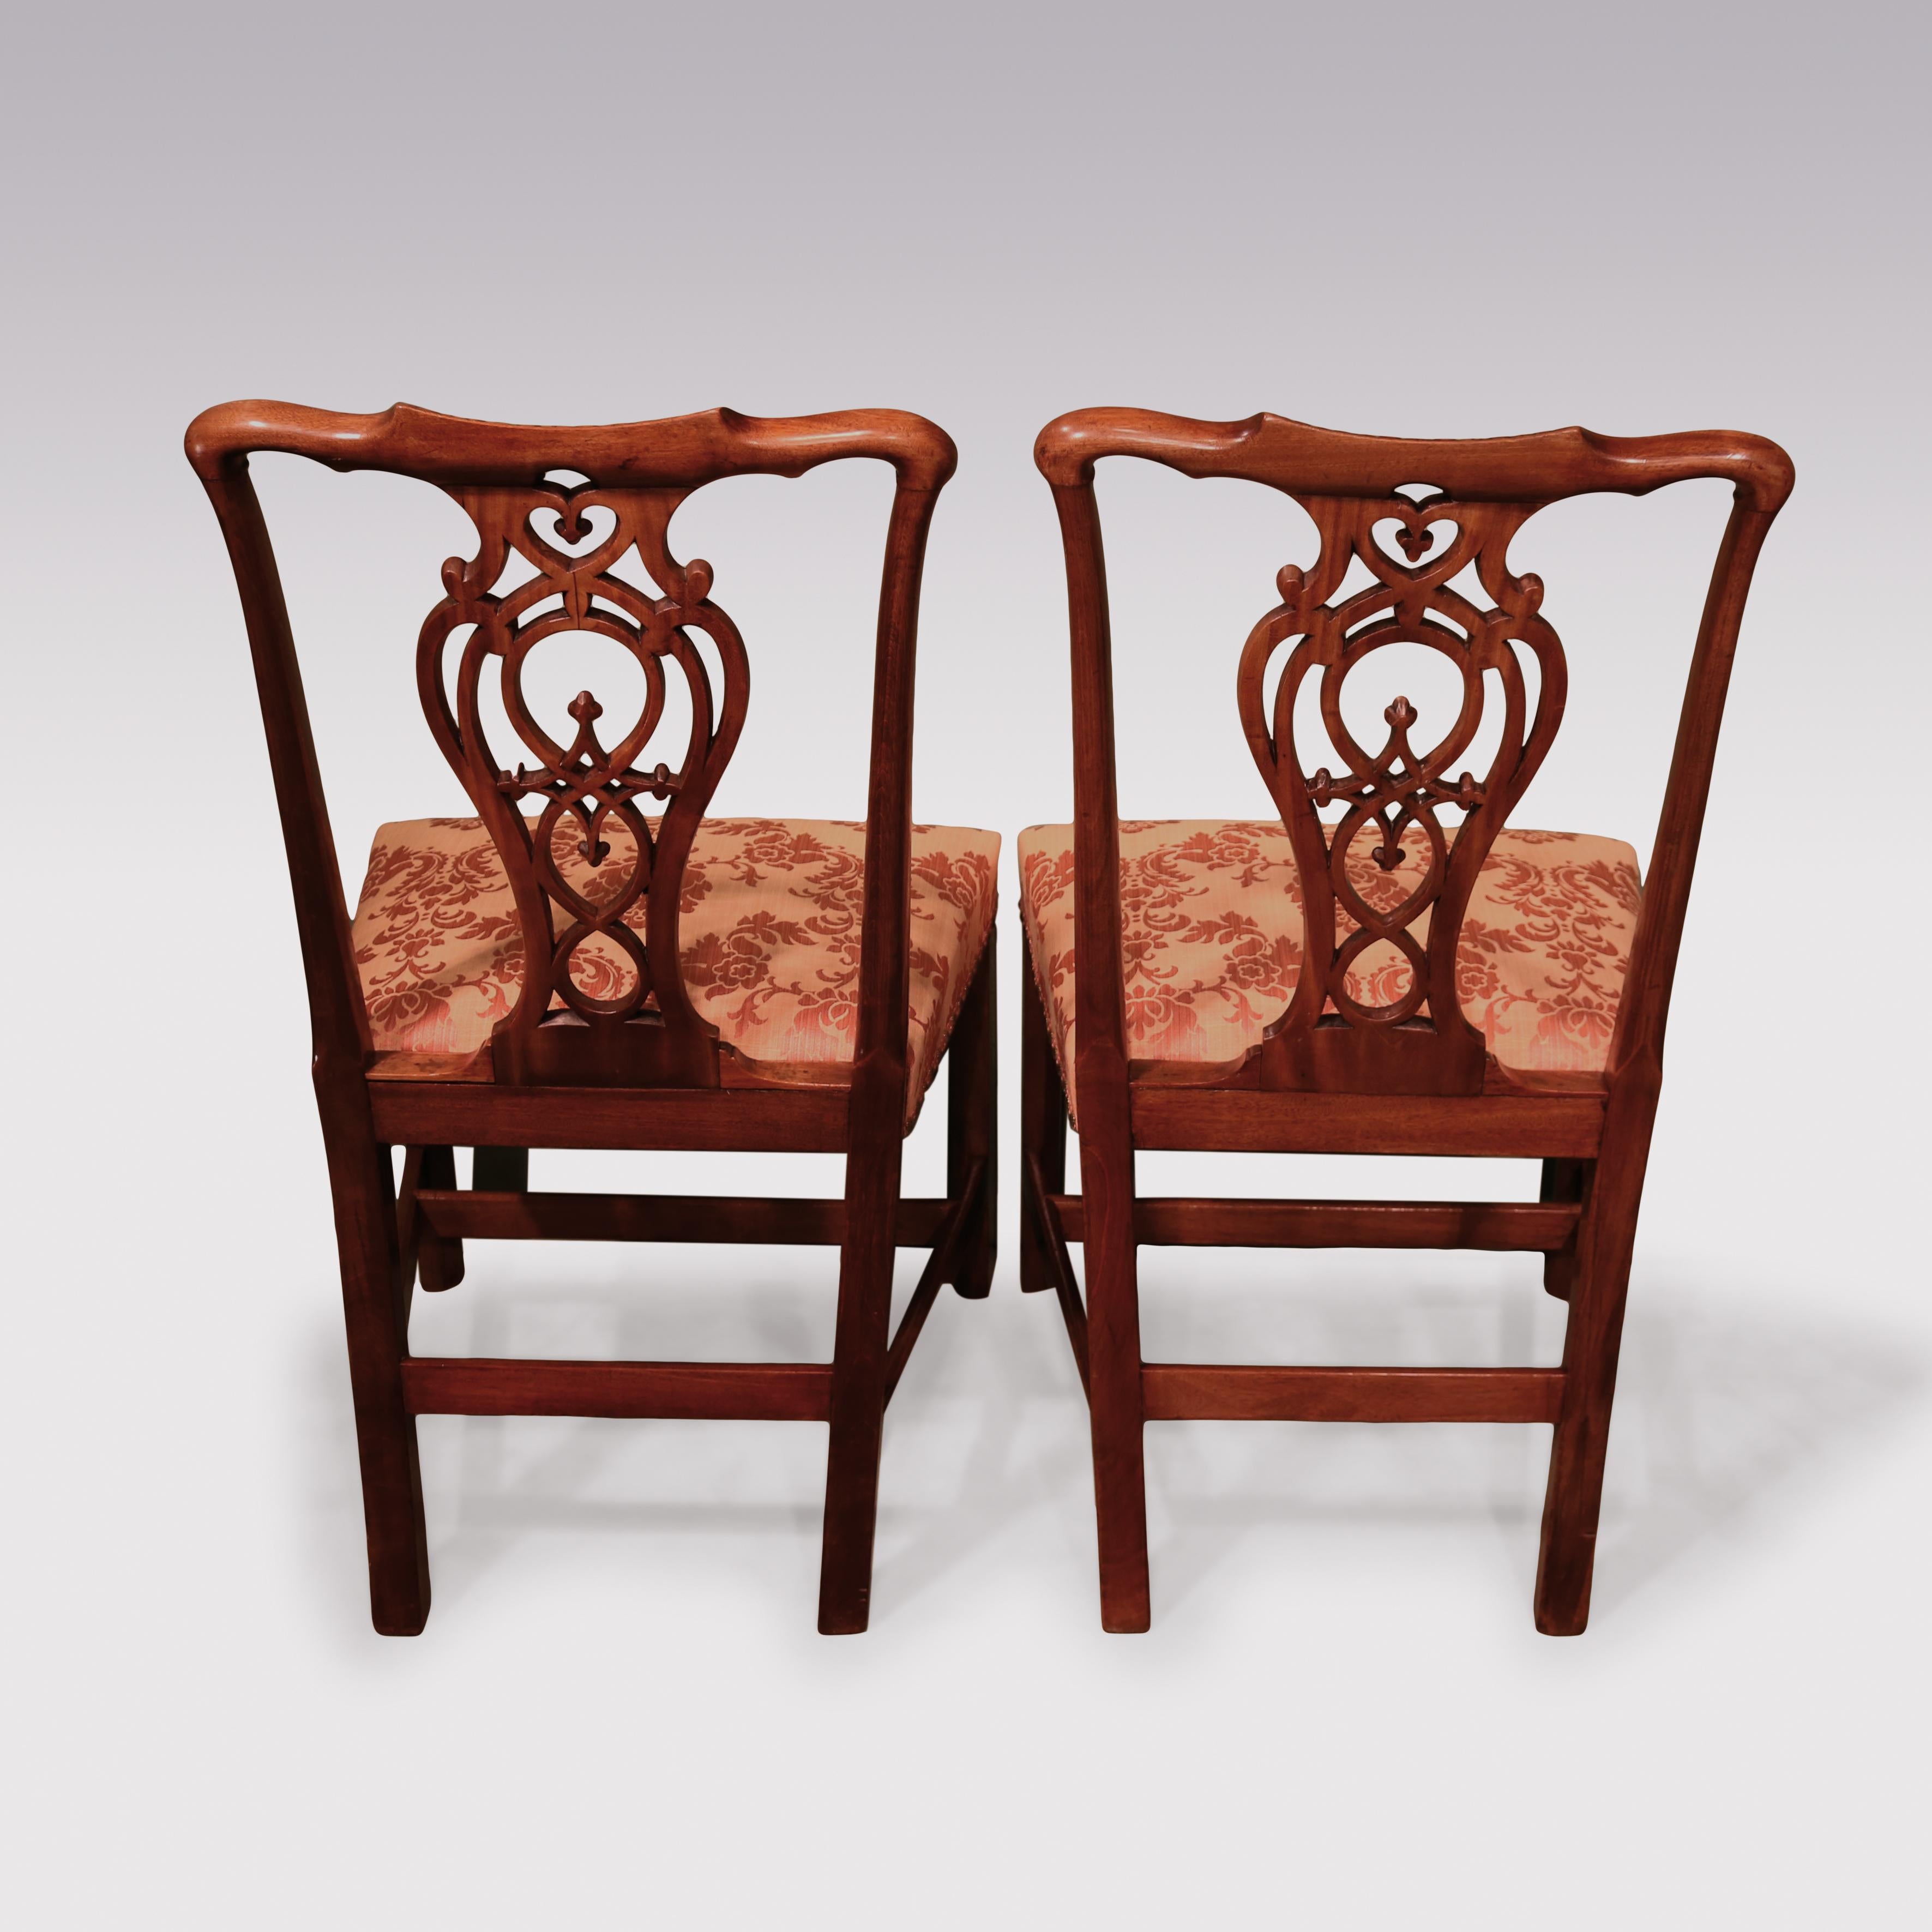 English Set of Six Mid-18th Century Chippendale Mahogany Side Chairs